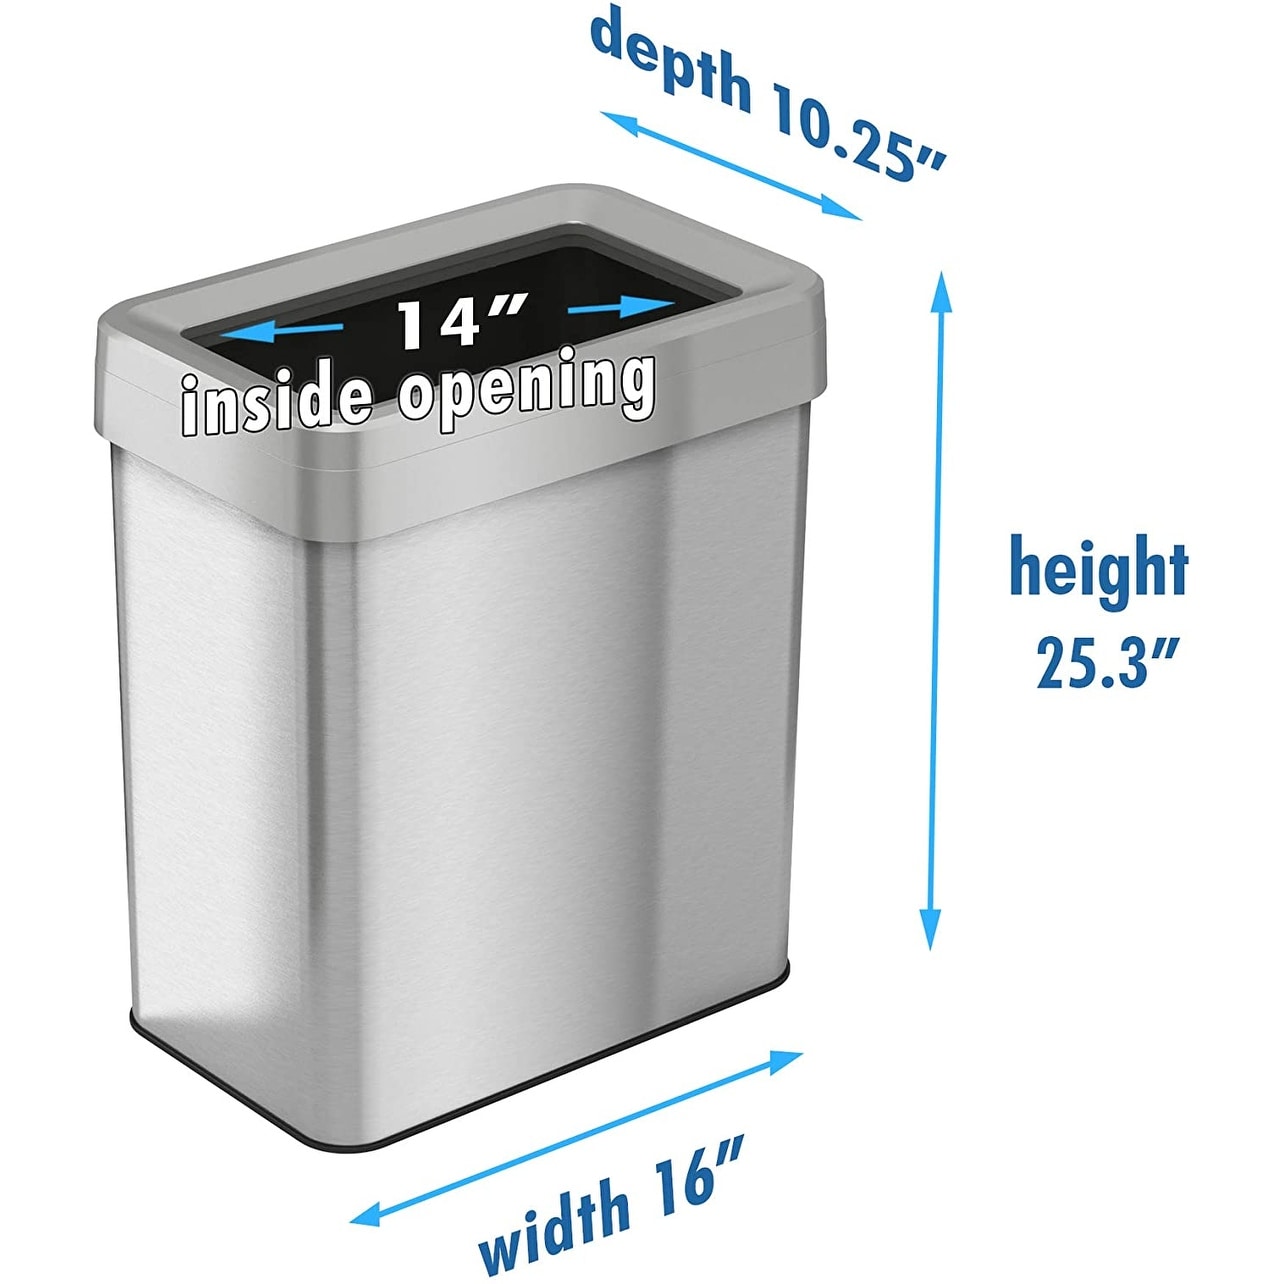 iTouchless Dual Compartment Touchless Trash Can Recycle Bin : 16 Gallon Stainless Steel